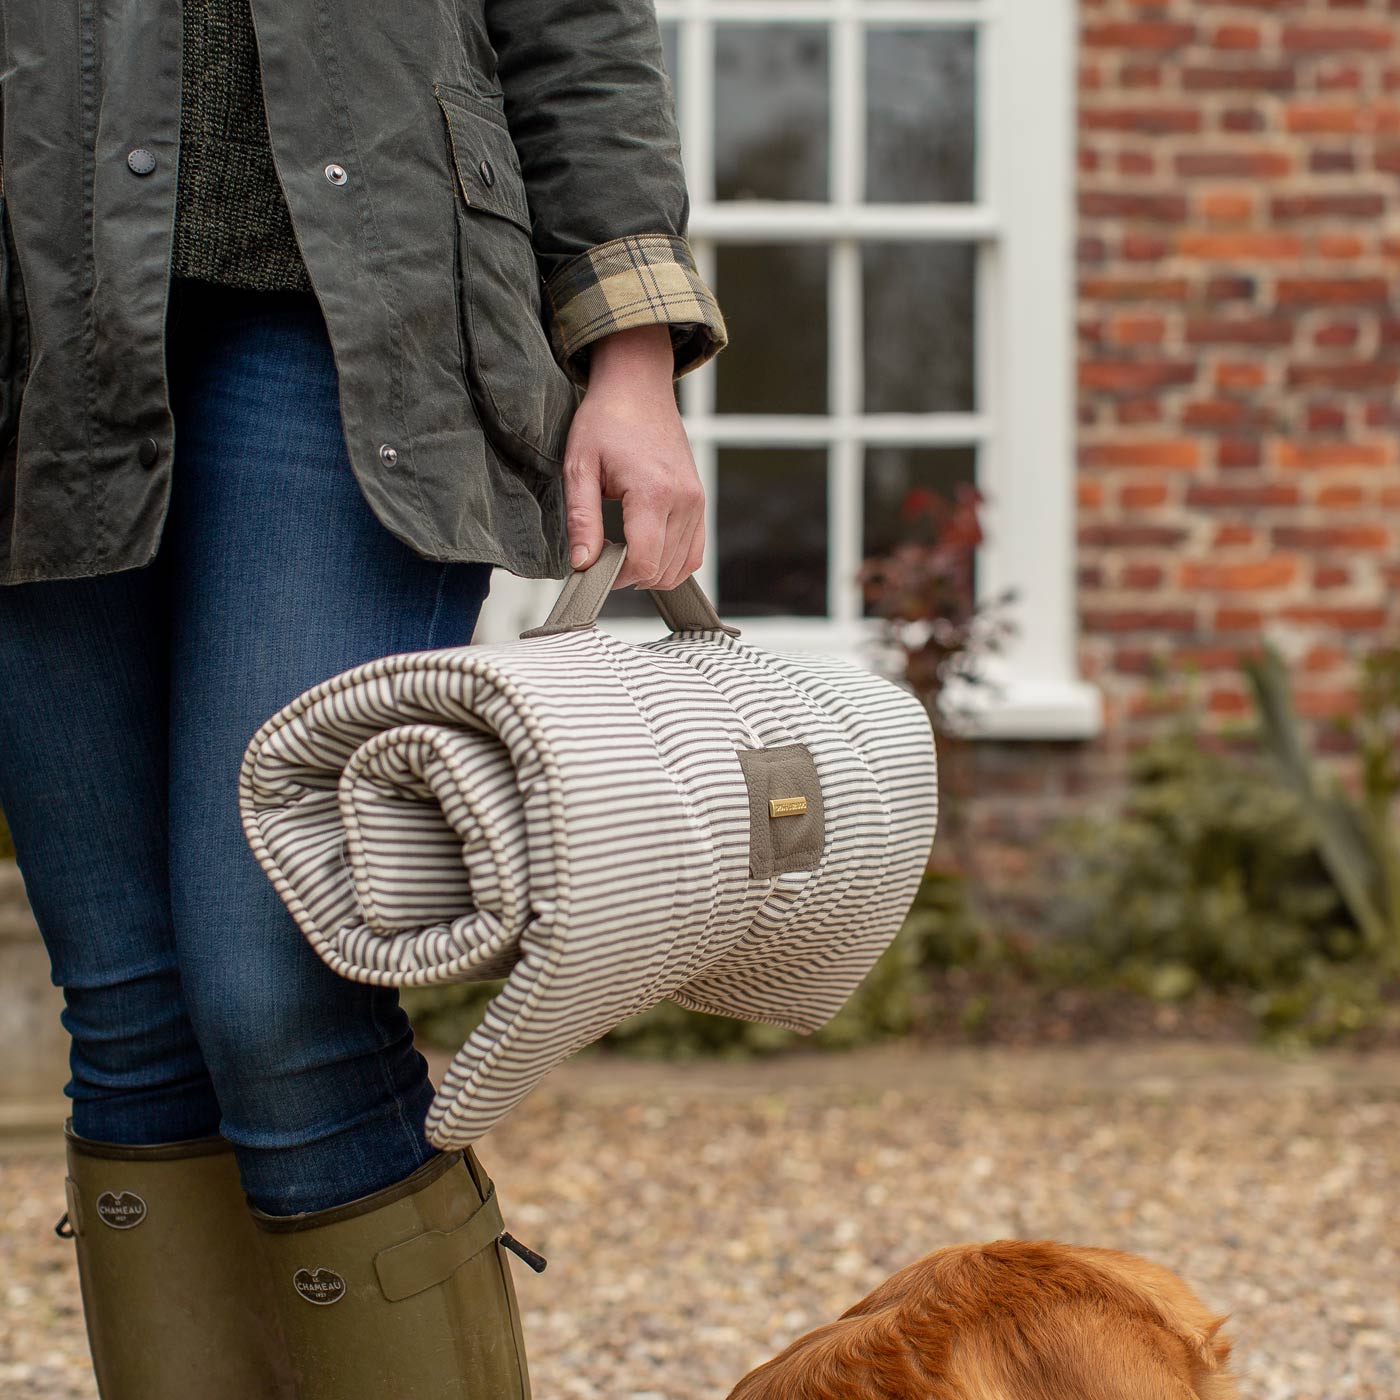 Embark on the perfect pet travel with our luxury Travel Mat in Regency Stripe. Featuring a Carry handle for on the move once Rolled up for easy storage, can be used as a seat cover, boot mat or travel bed! Available now at Lords & Labradors US